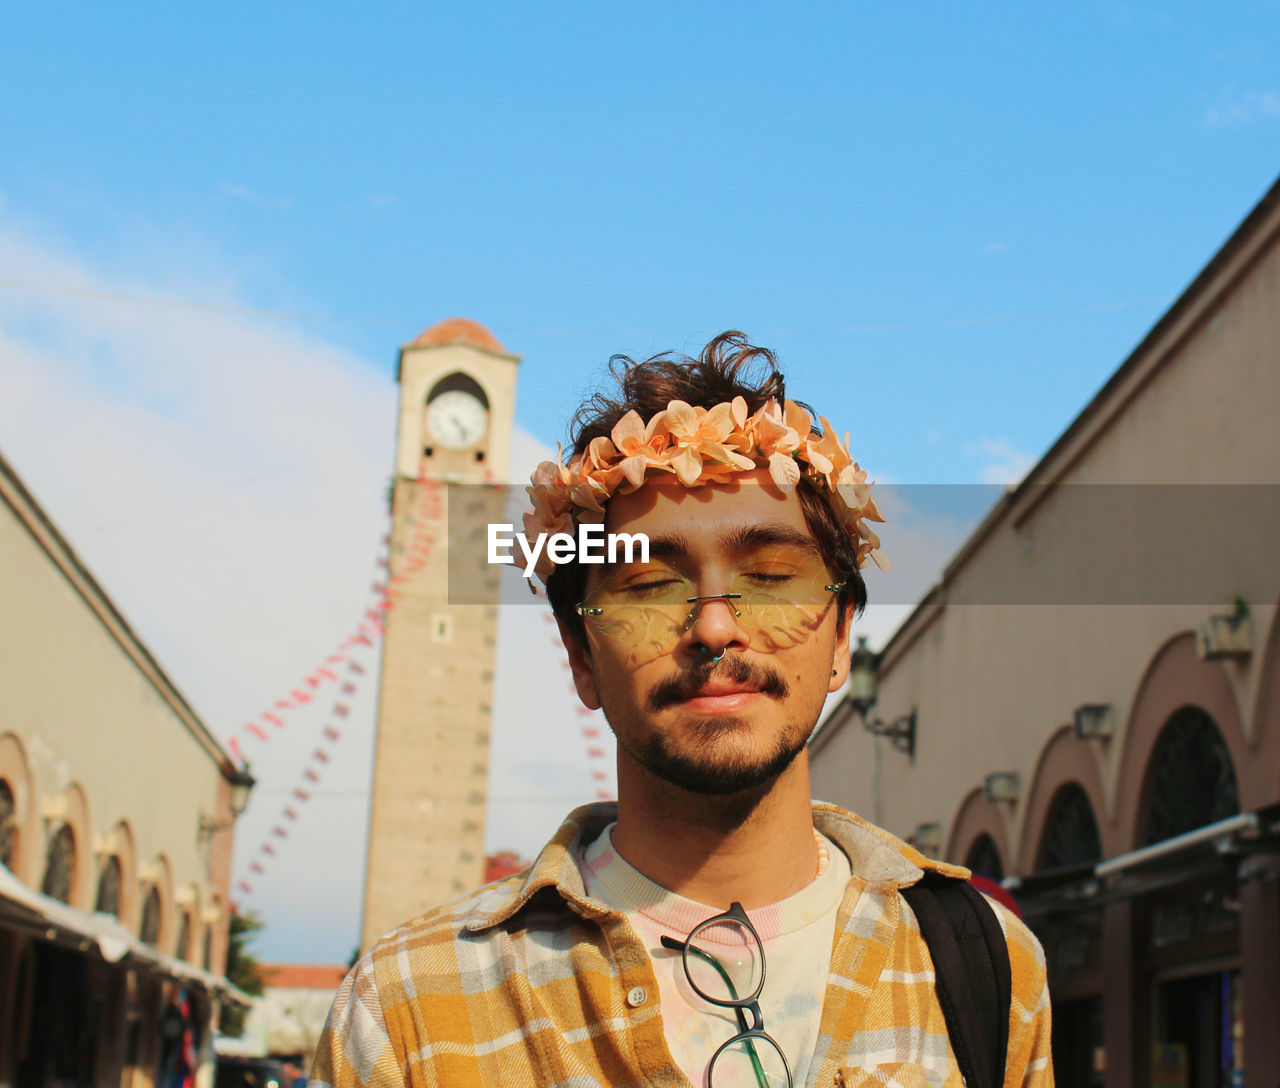 Portrait of young man with eye makeup and flower crown behind historic old clock tower adana turkey